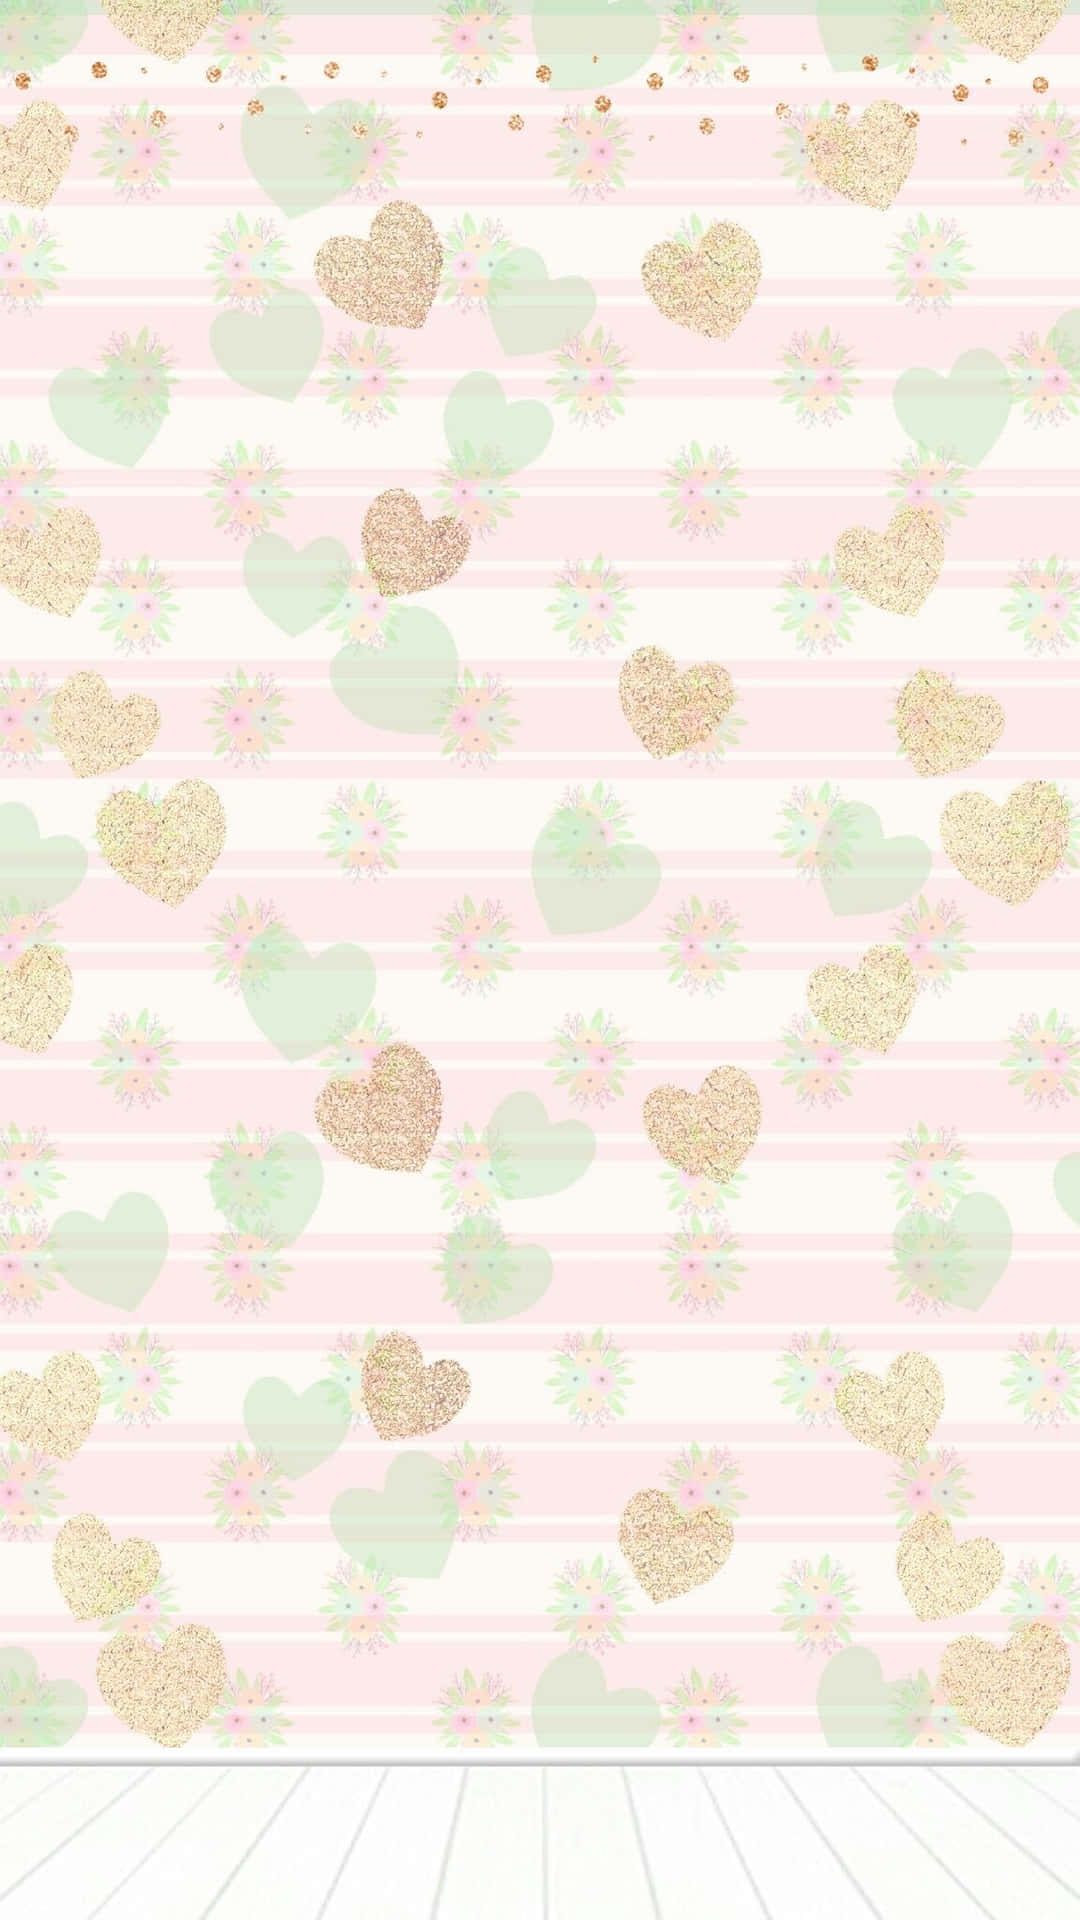 Get Lost In The Cute, Vibrant Pattern Of This Iphone. Wallpaper